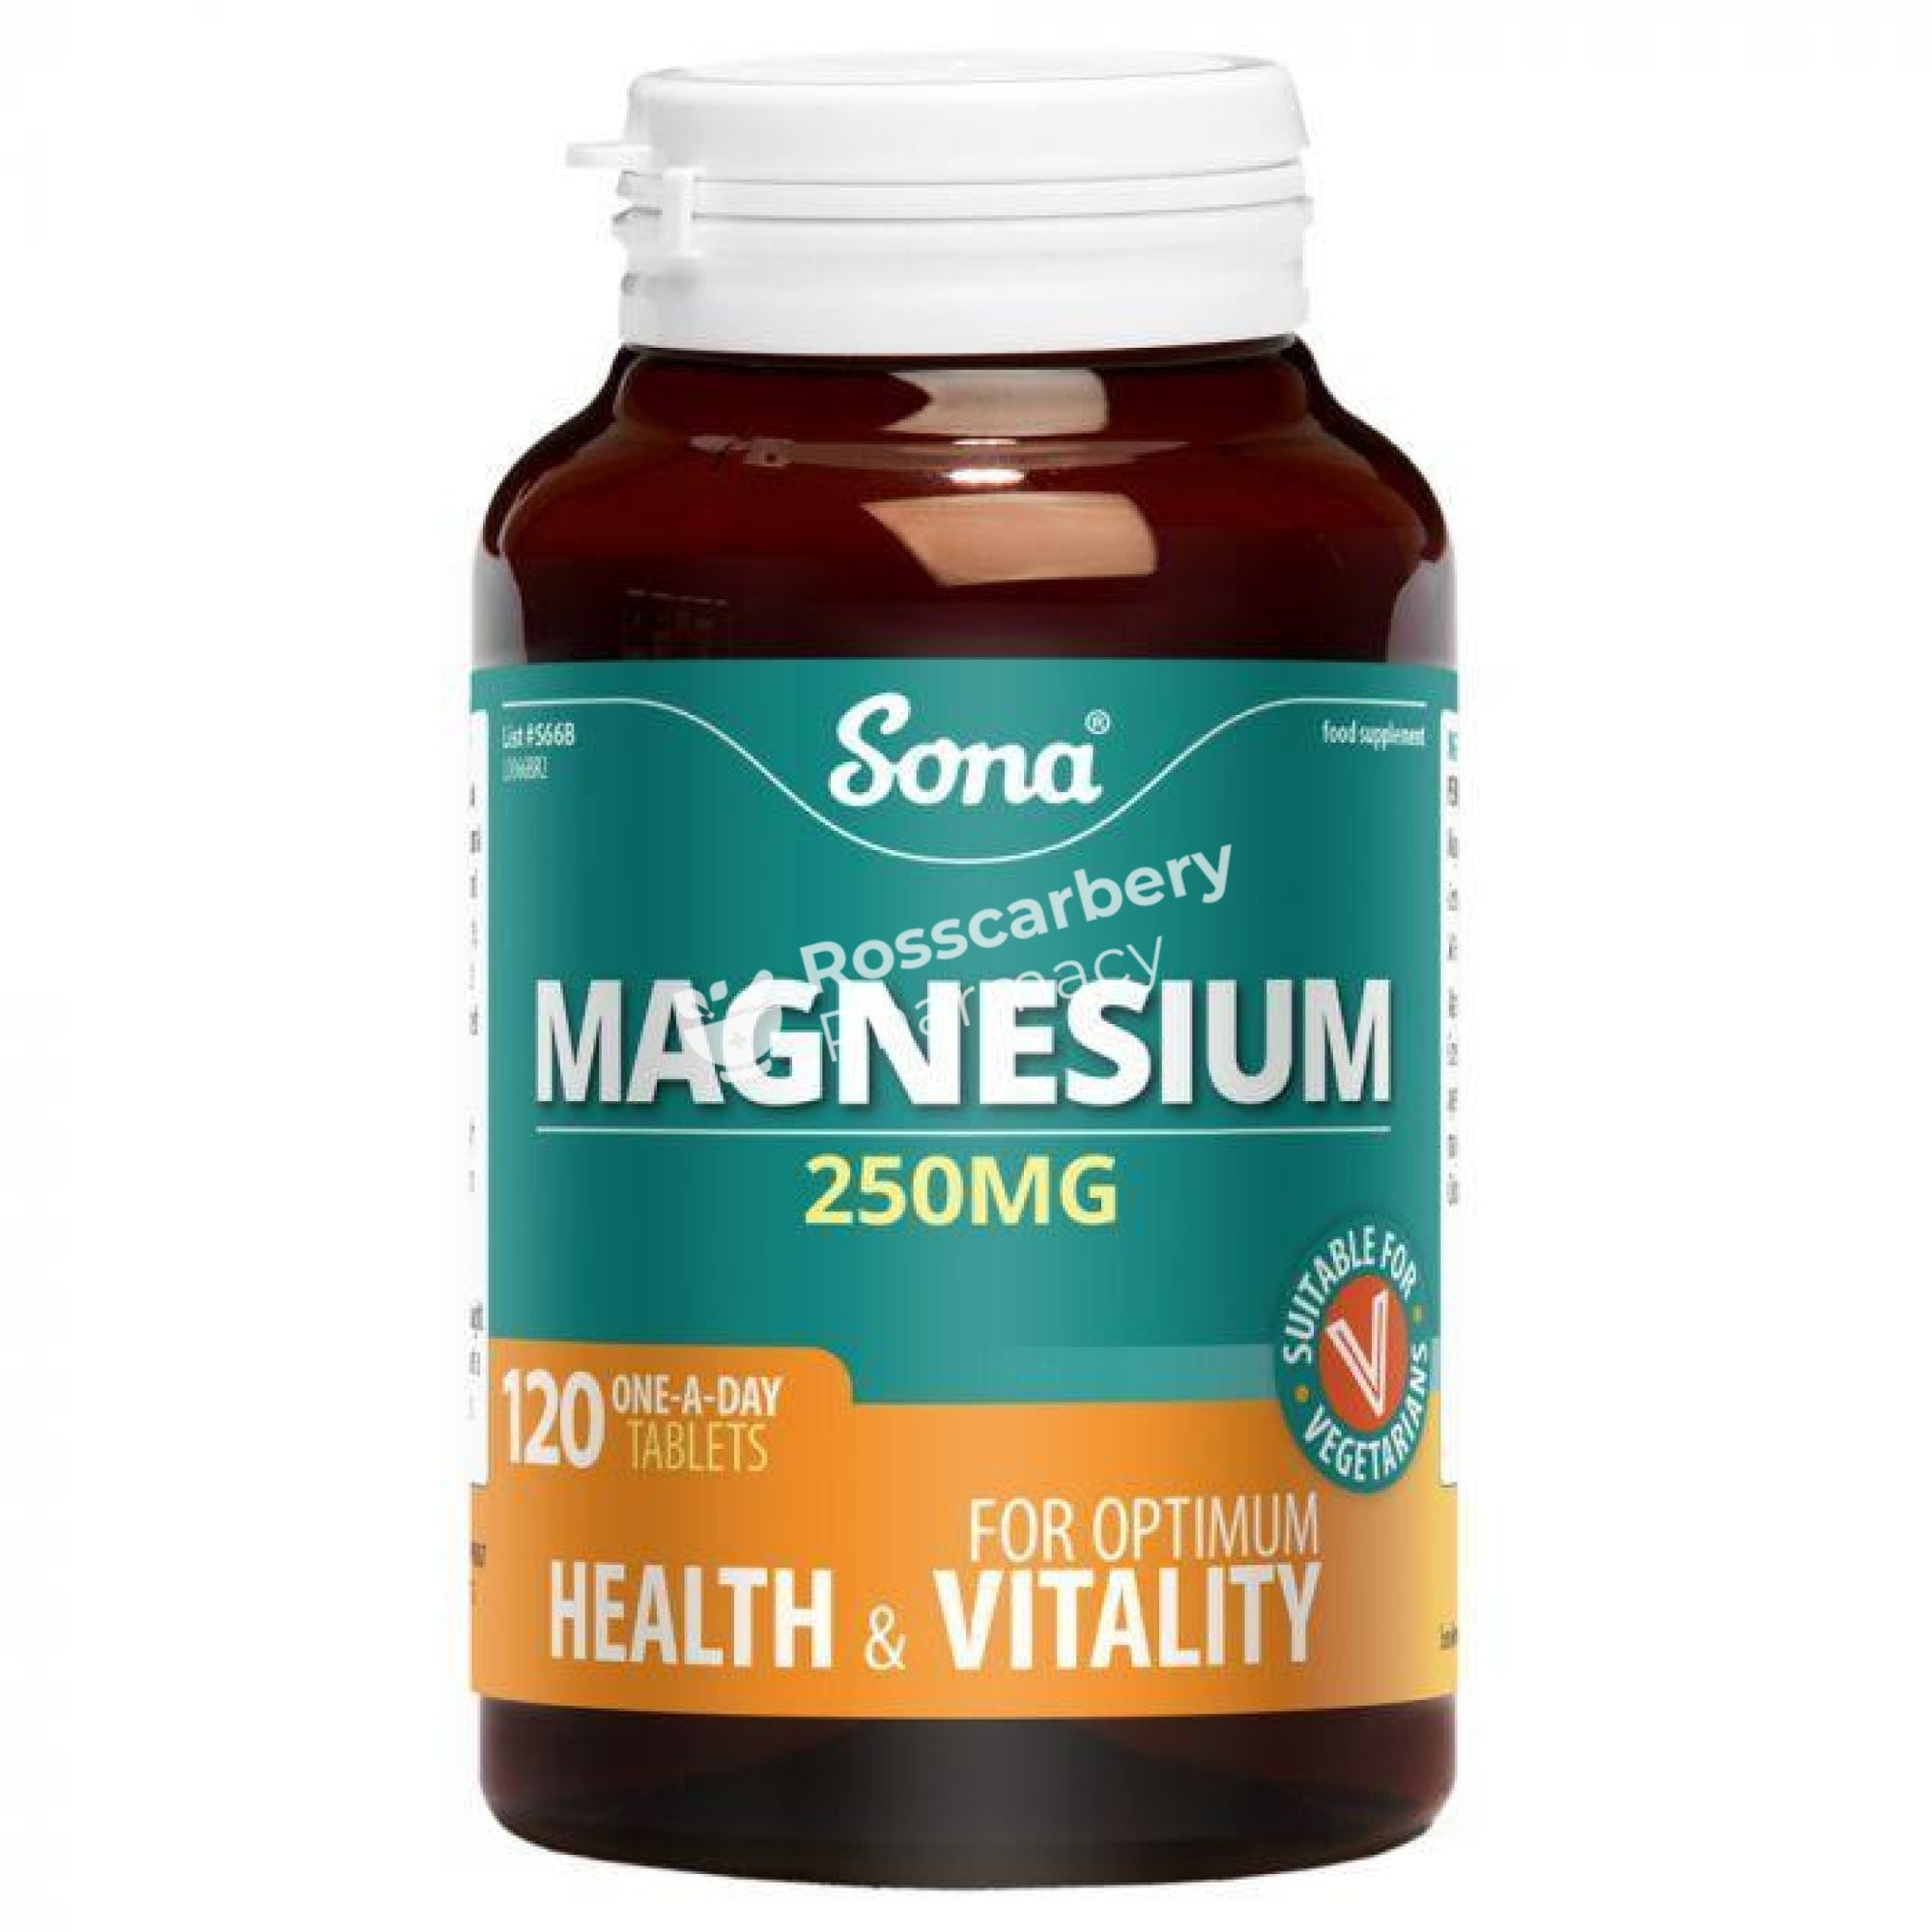 Sona - Magnesium 250Mg Tablets Energy & Wellbeing